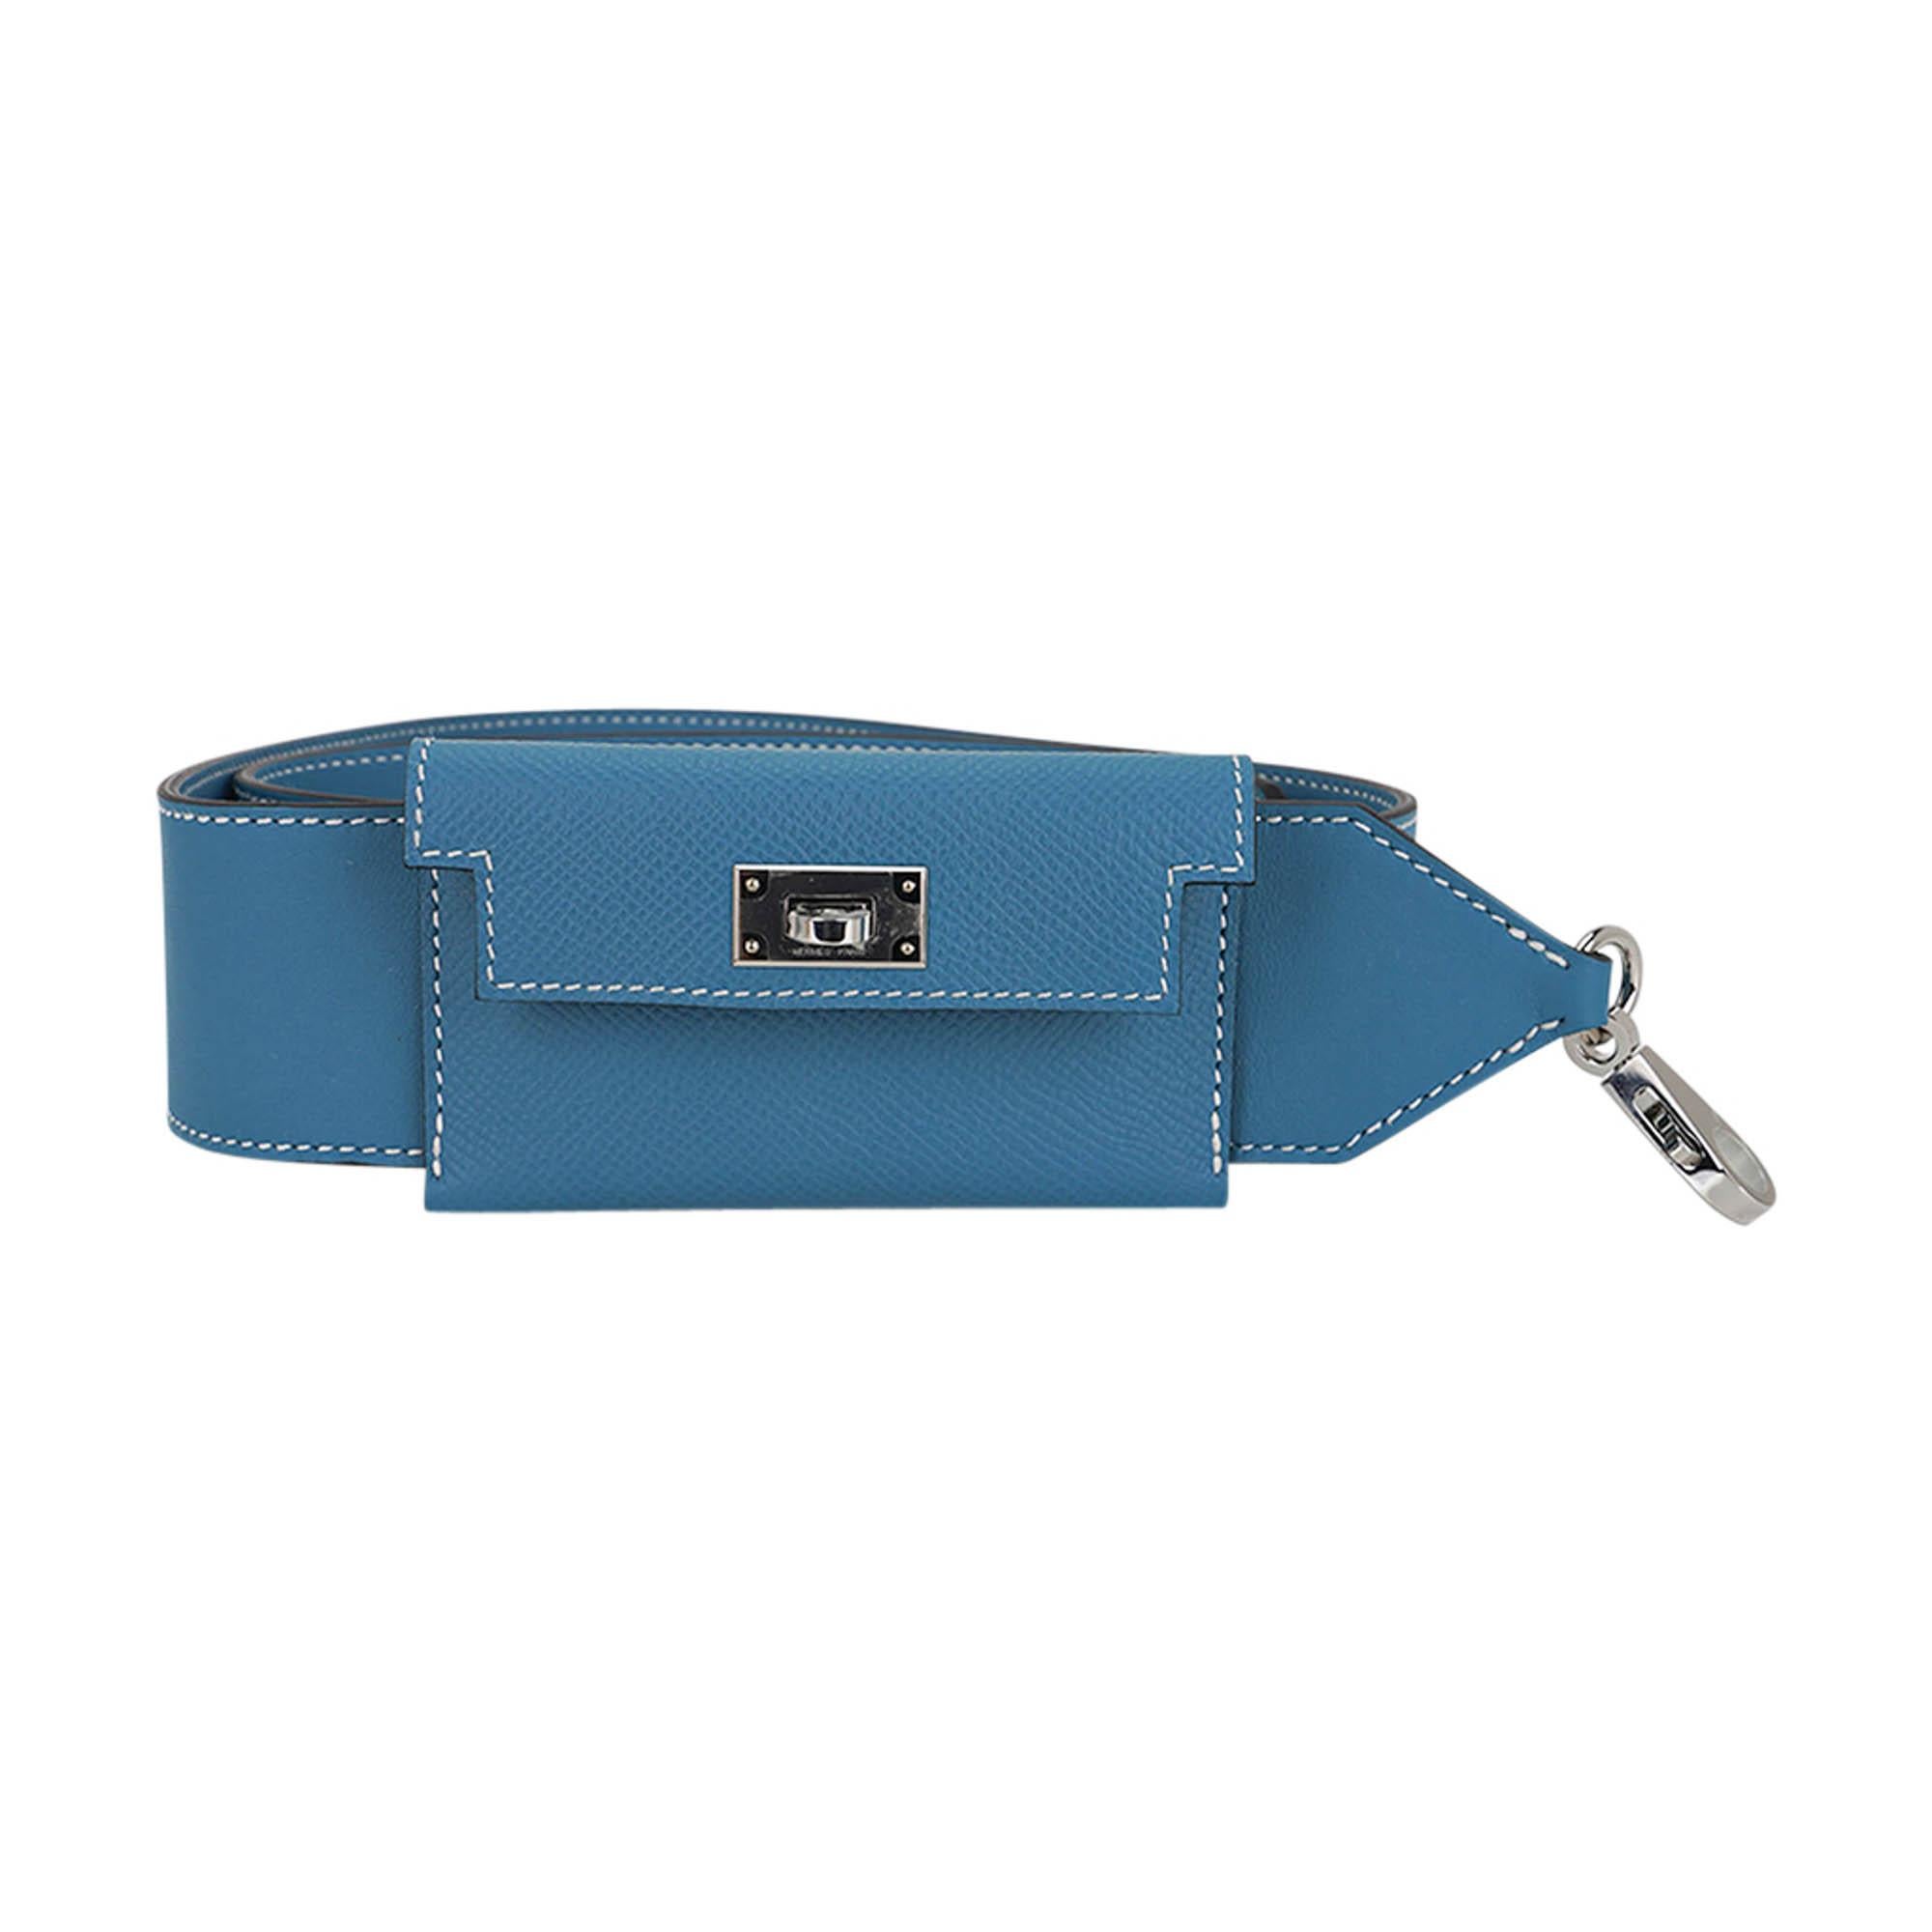 Mightychic offers an Hermes Kelly Pocket Bag Strap featured in Blue Jean.
Yes, it is back!  Iconic beloved Hermes Bleu Jean.
The strap has a card holder with a Kelly turn key clasp.
Fresh with Palladium hardware.
Strap is Swift leather and card case